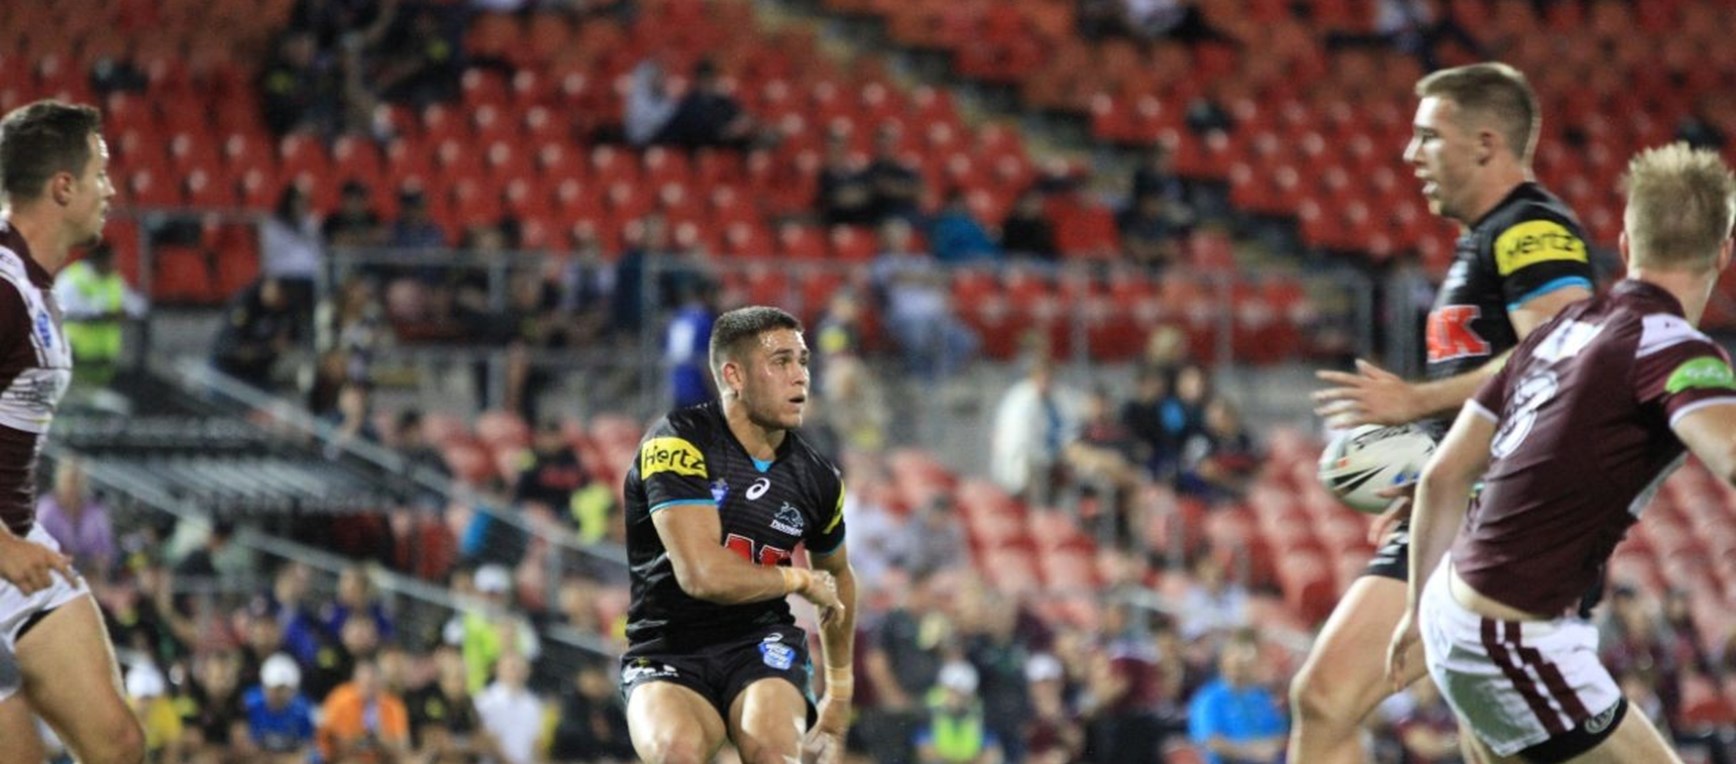 NSW Cup Photo Gallery: Panthers vs Sea Eagles